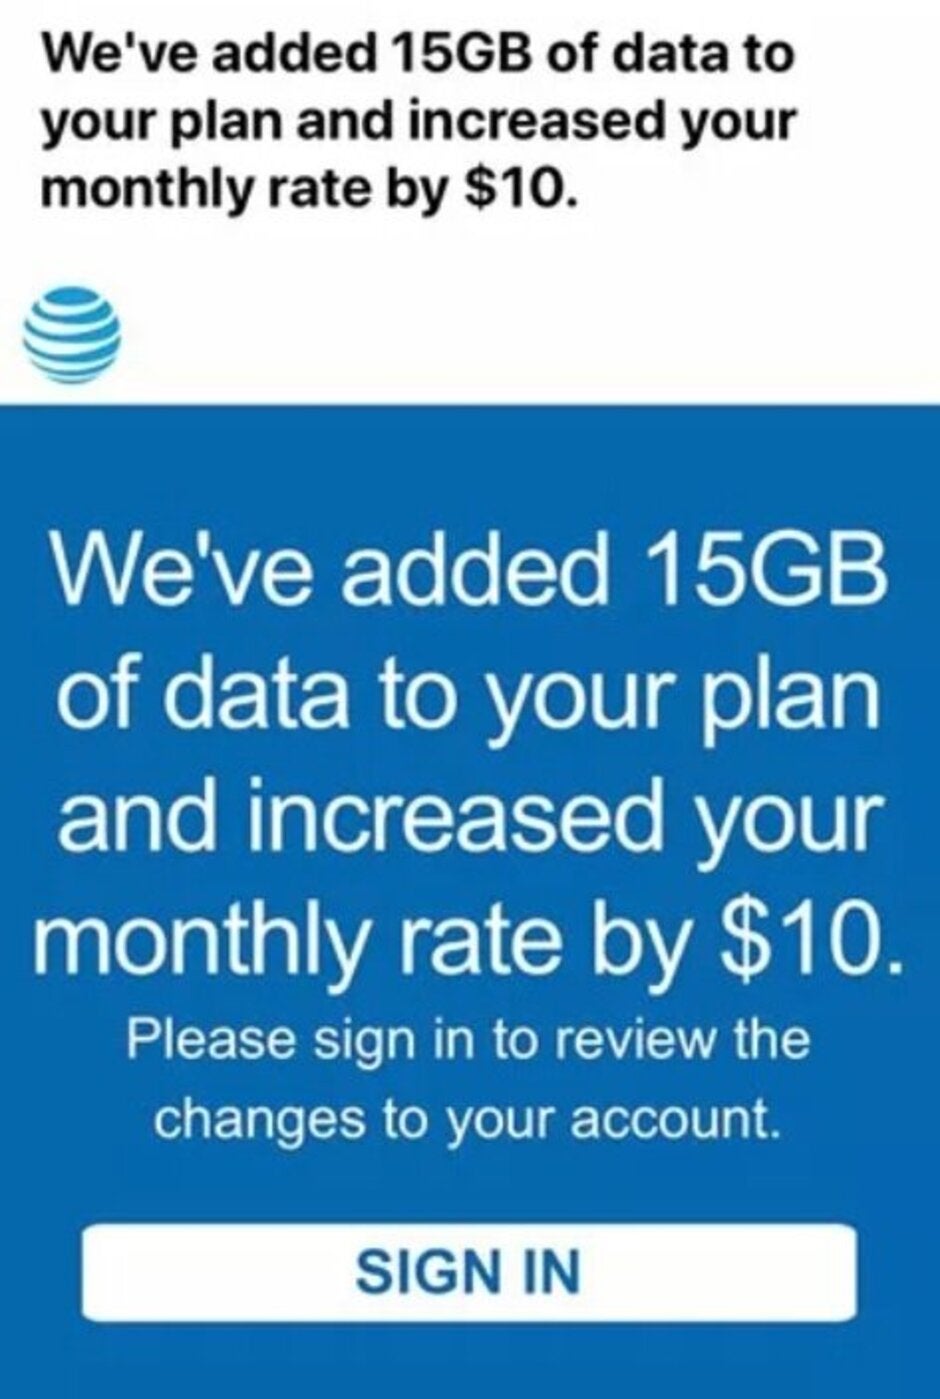 Doesn't look like AT&amp;T customers who received this notice have a choice, does it? - AT&T moves grandfathered subscribers into pricier plans unilaterally